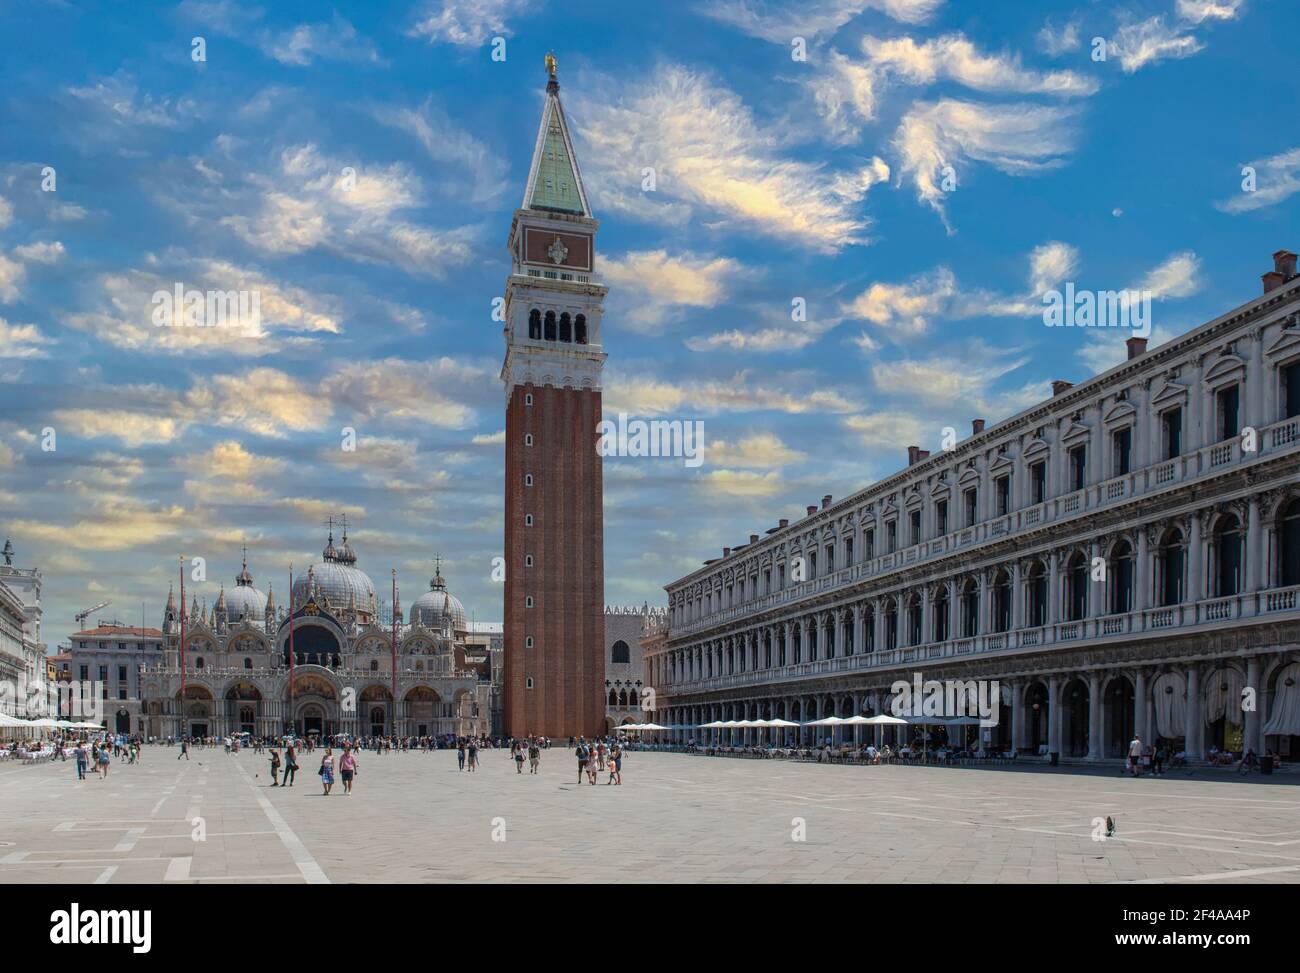 venice italy july 18 2020: st mark's basilica of venice on a clear and sunny day Stock Photo